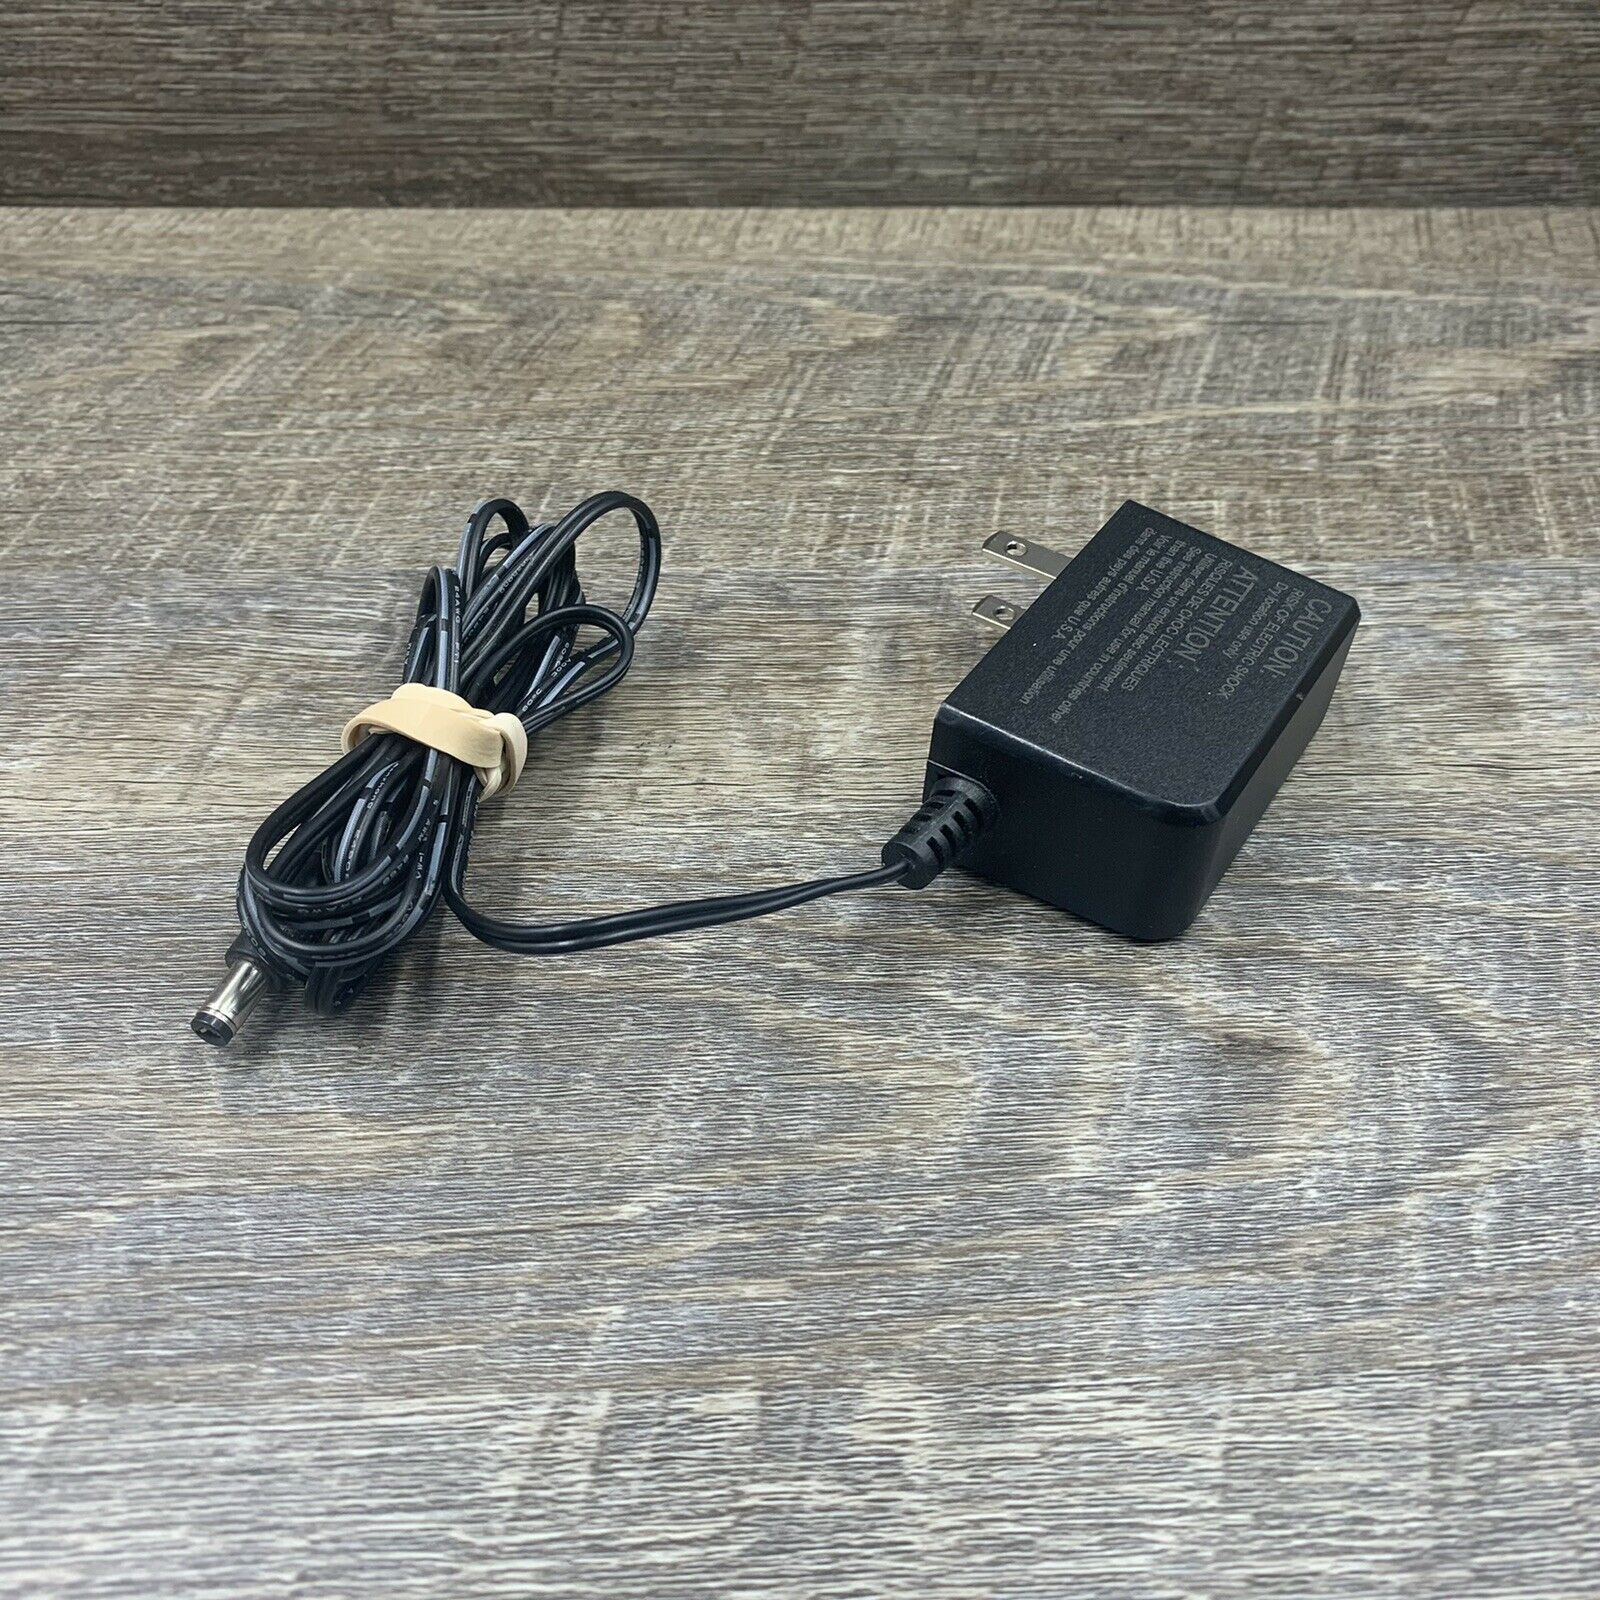 *Brand NEW*AMC Model AD-0121900060US 19V 0.6A AC Adapter Class 2 Power Supply - Click Image to Close